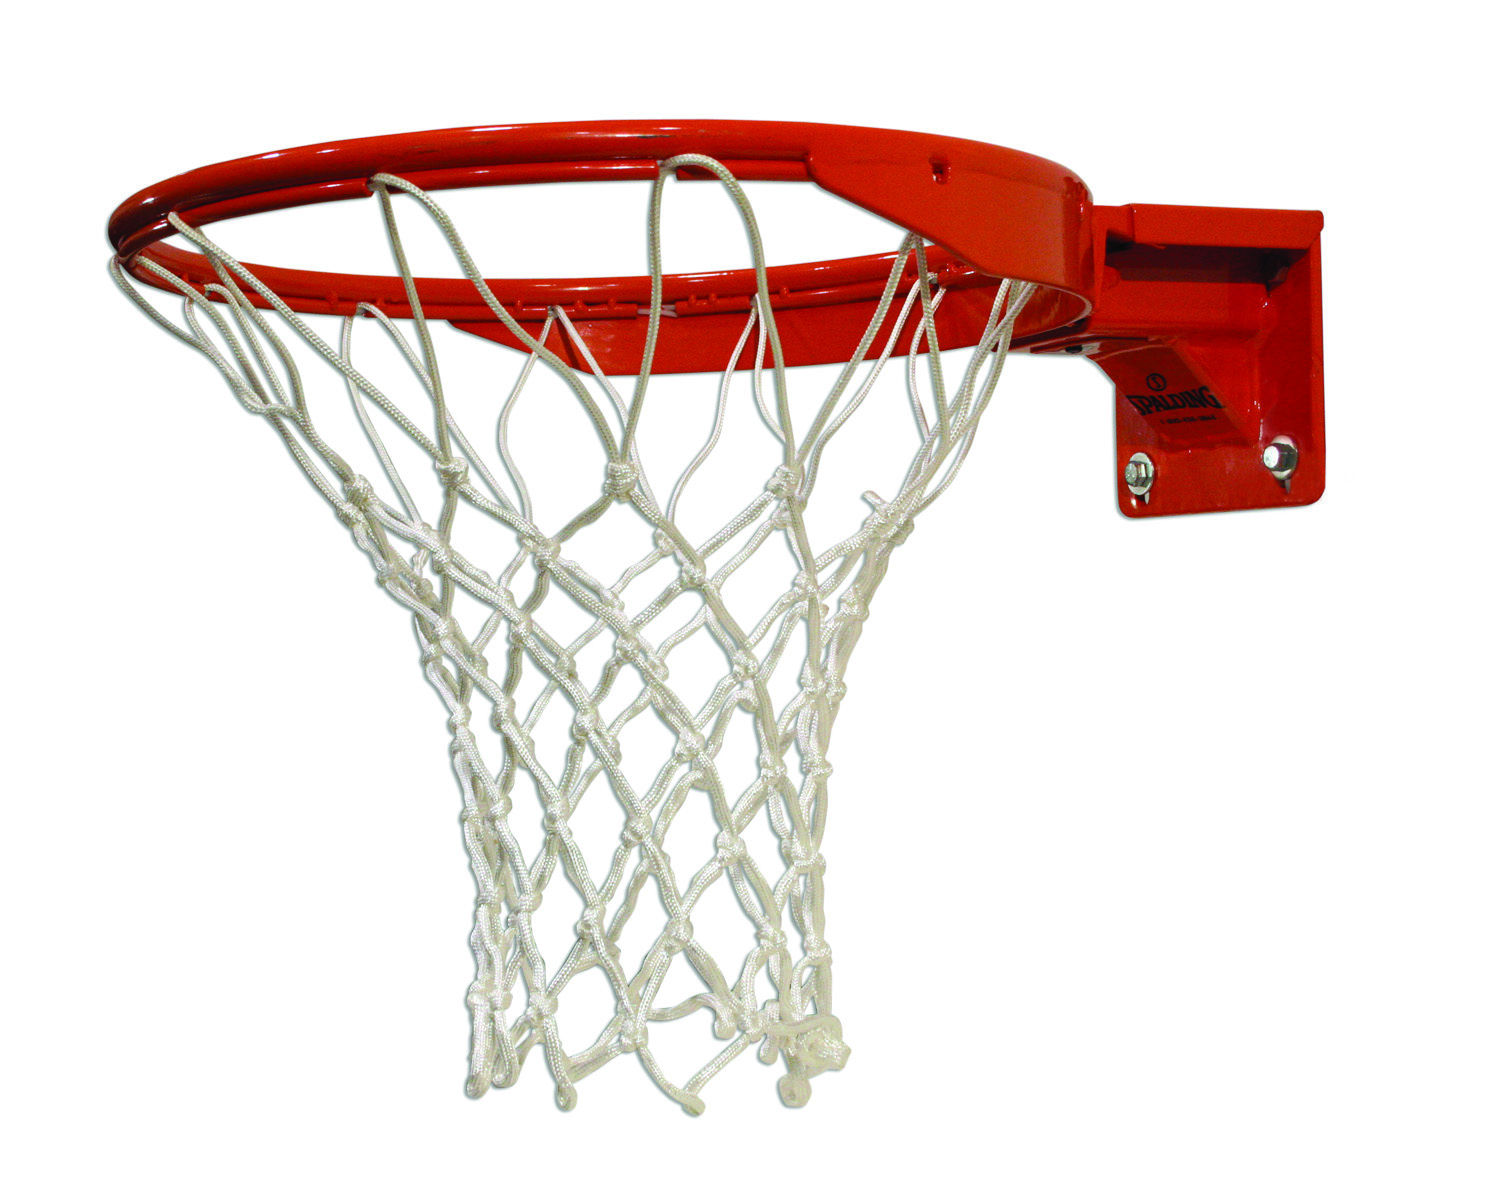 Basketball In Hoop Clipart Bl